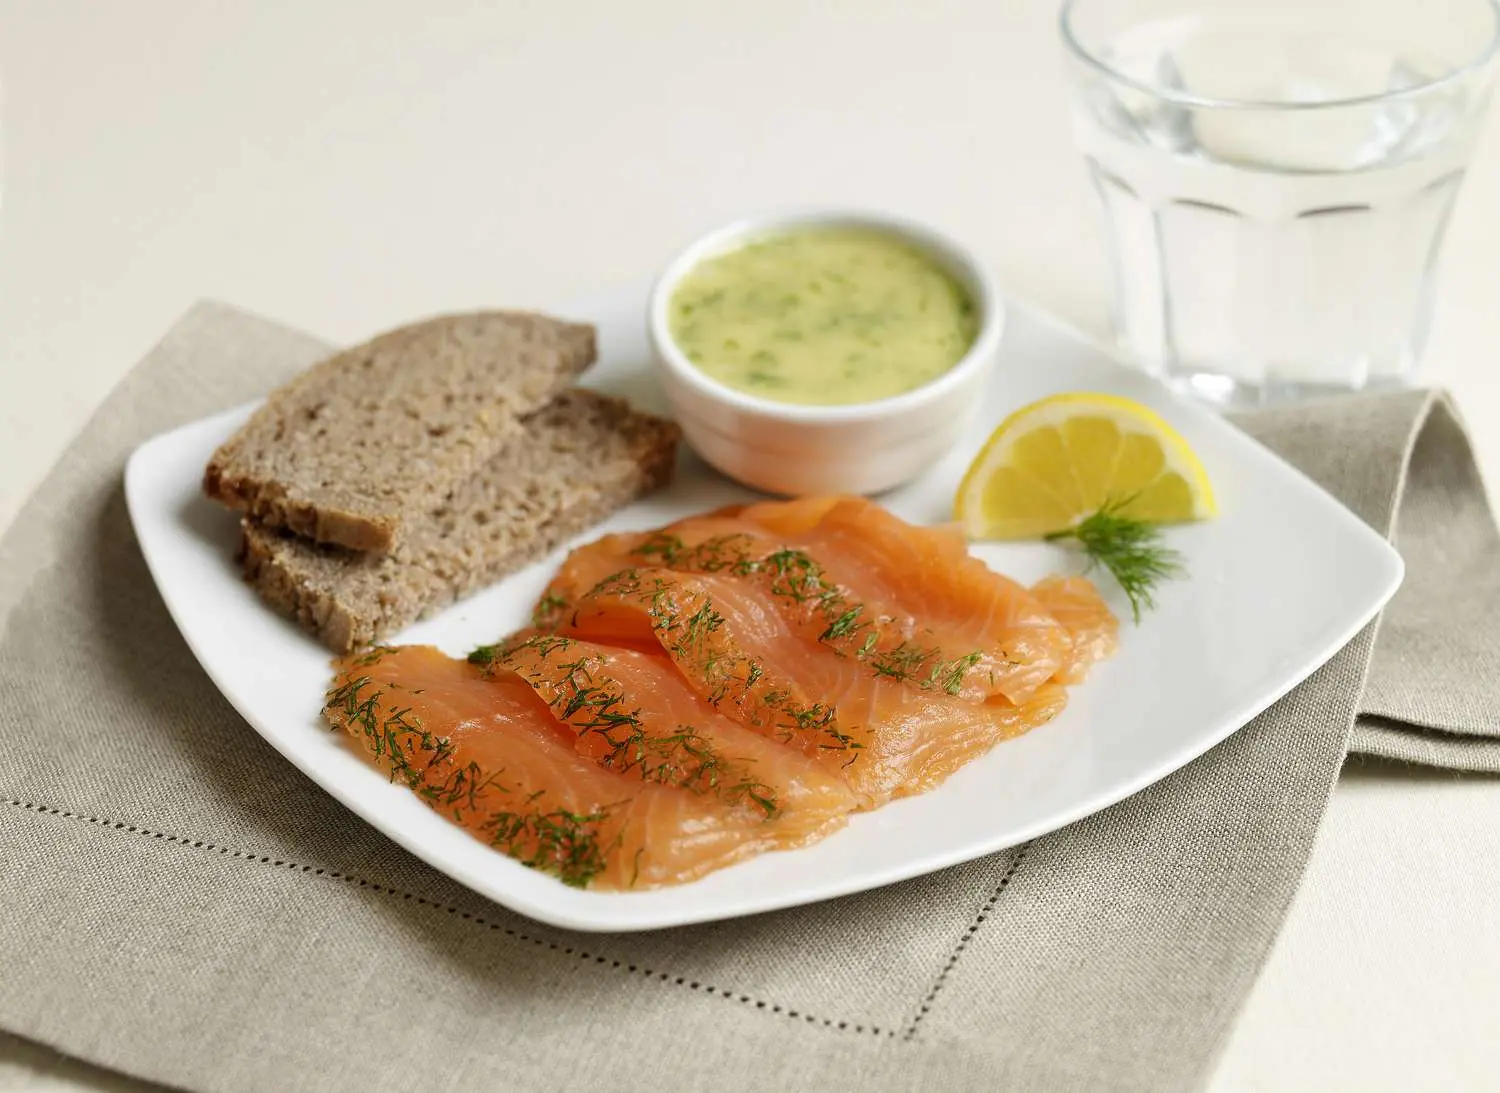 sauce for smoked salmon - What condiments go with salmon